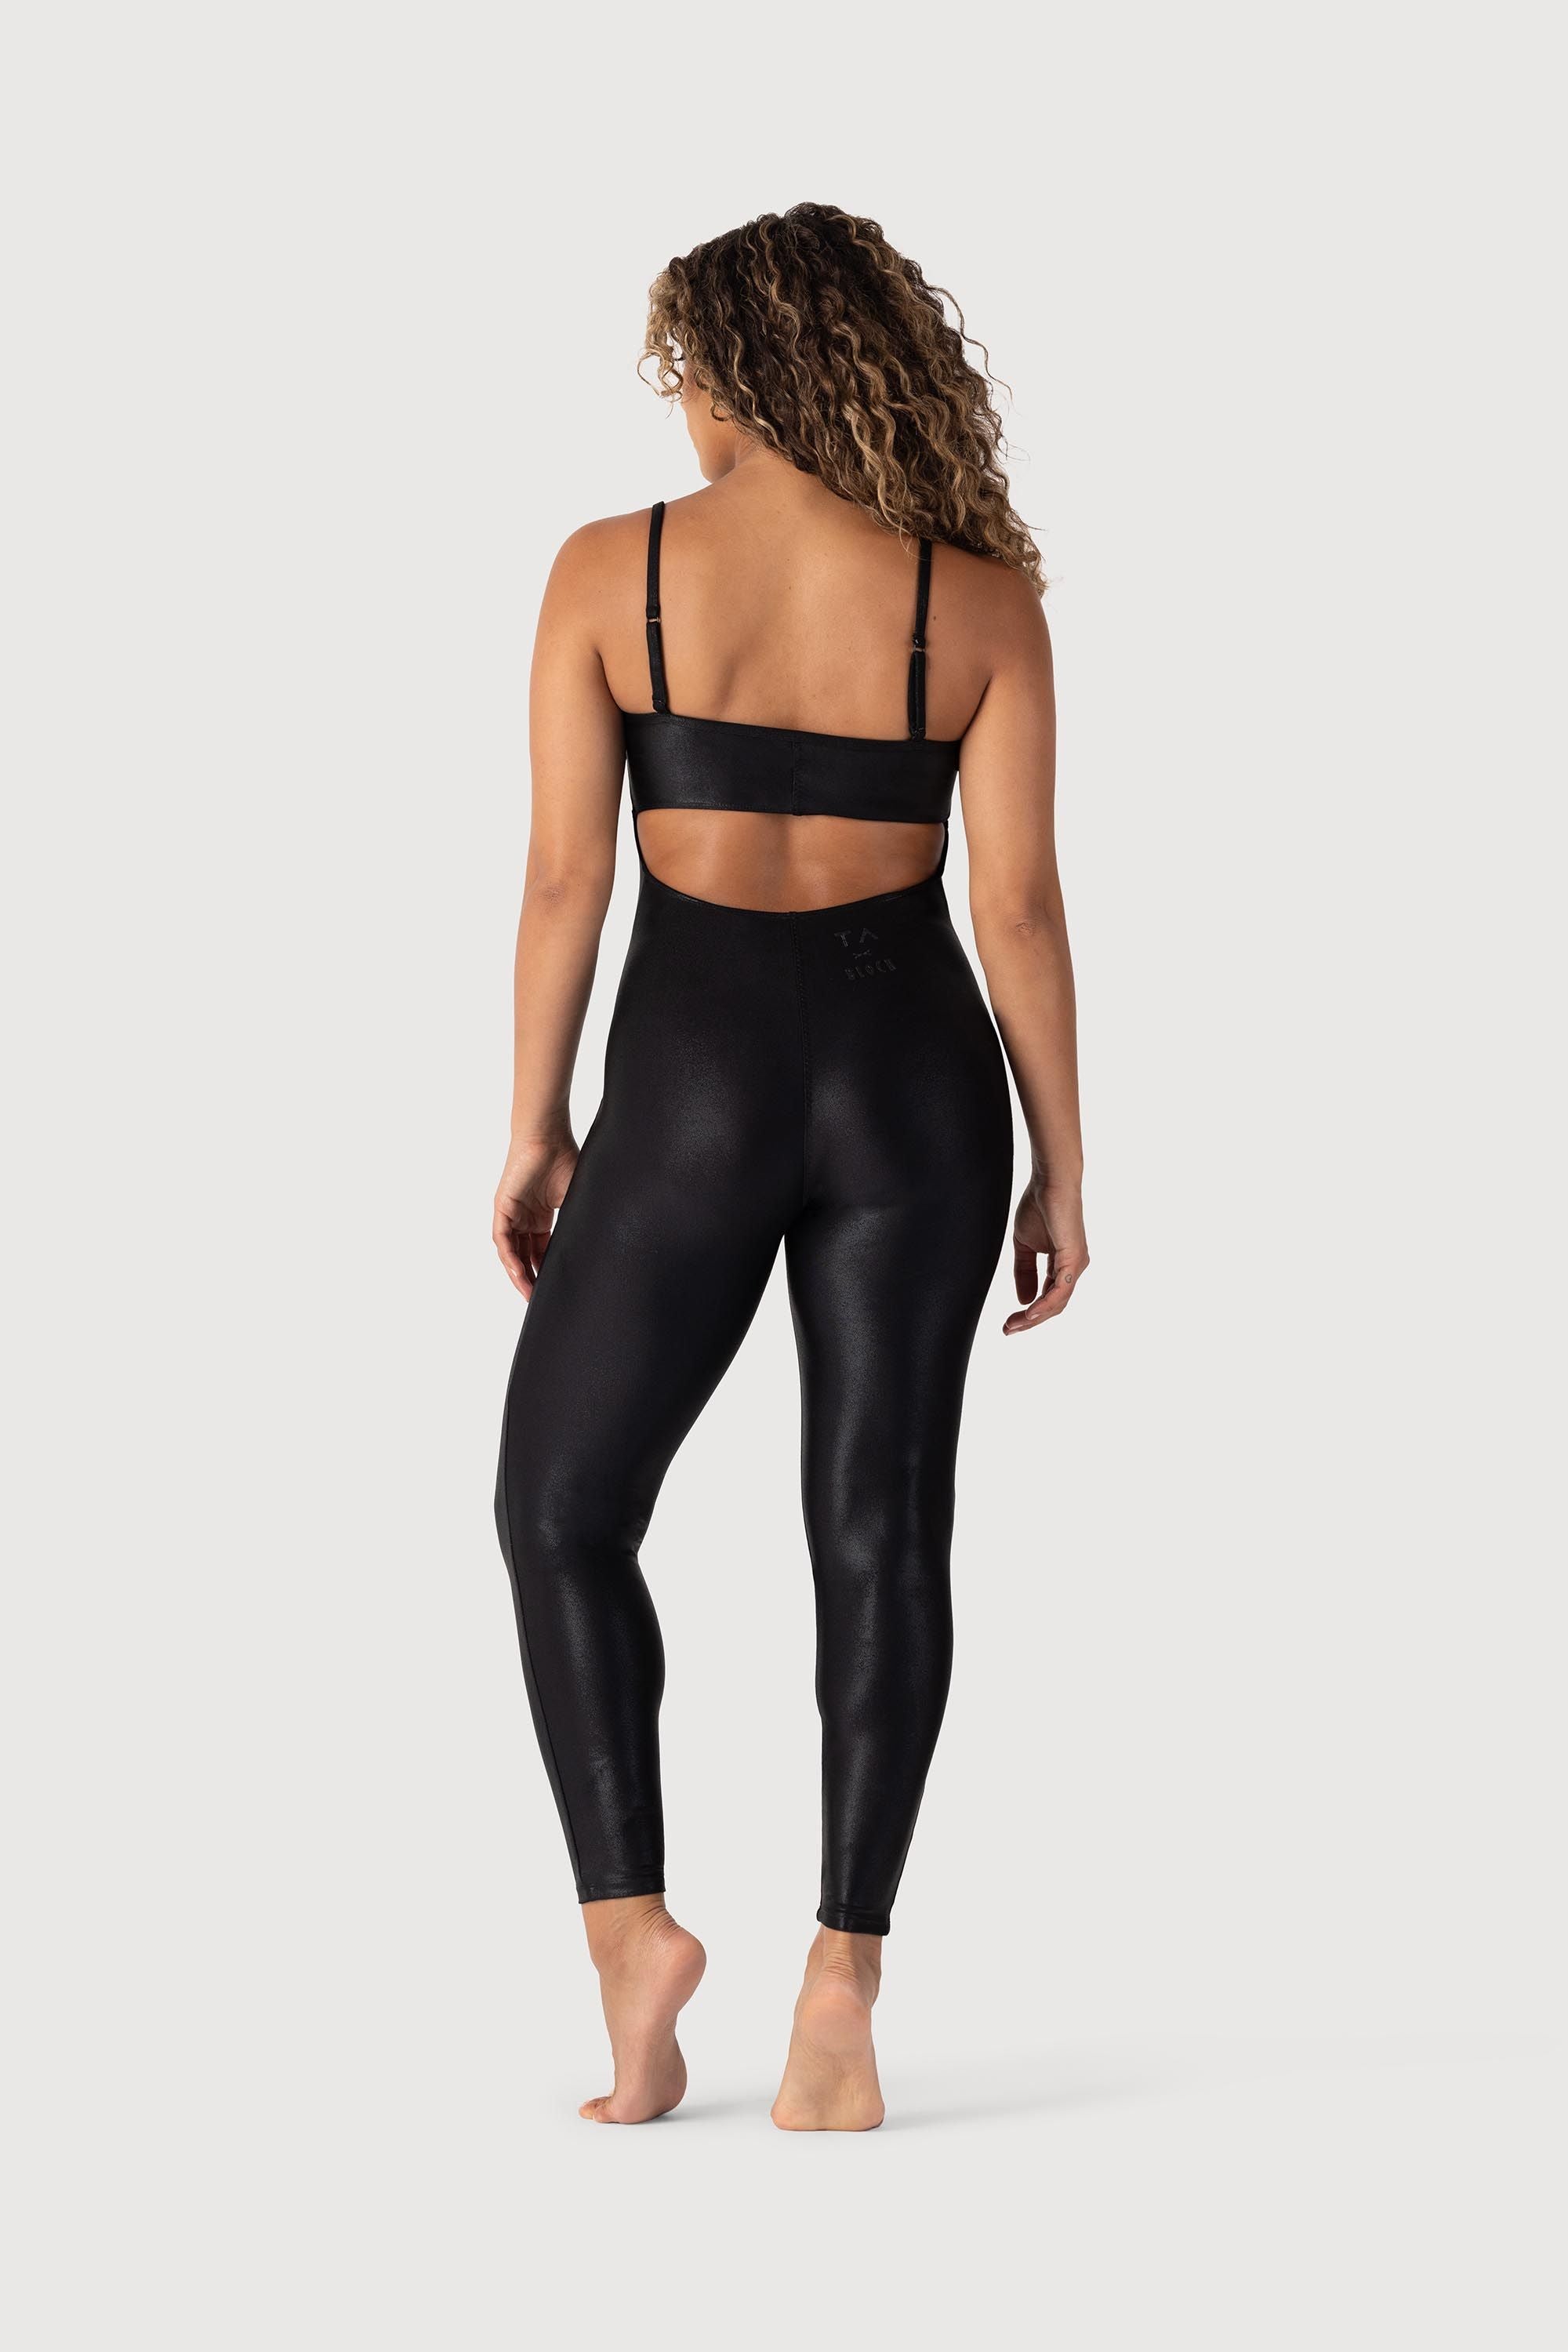 High Rise 7/8 Legging - Tracy Anderson